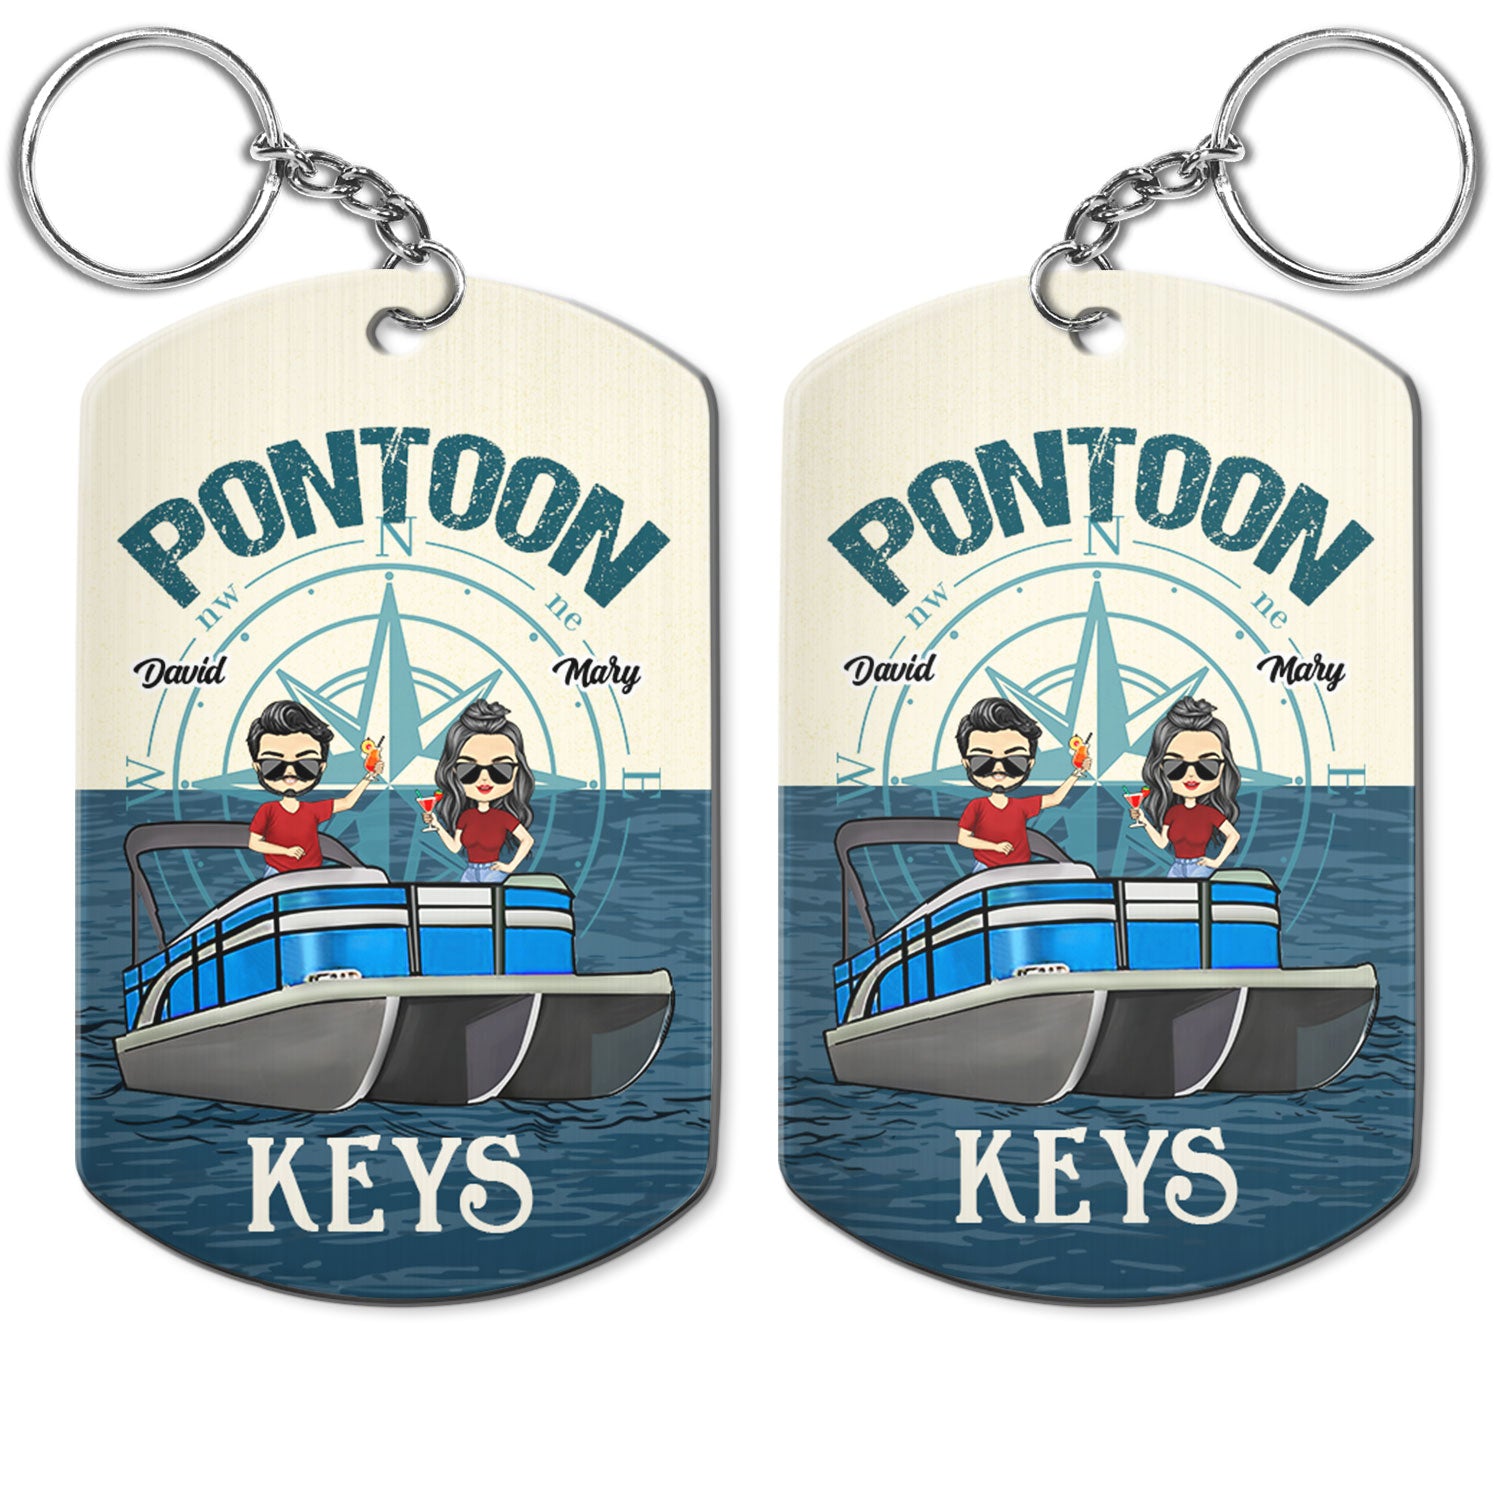 Boating Pontoon Keys For Husband And Wife - Gift For Couples, Pontooning Lovers, Lake Lovers, Travelers - Personalized Aluminum Keychain